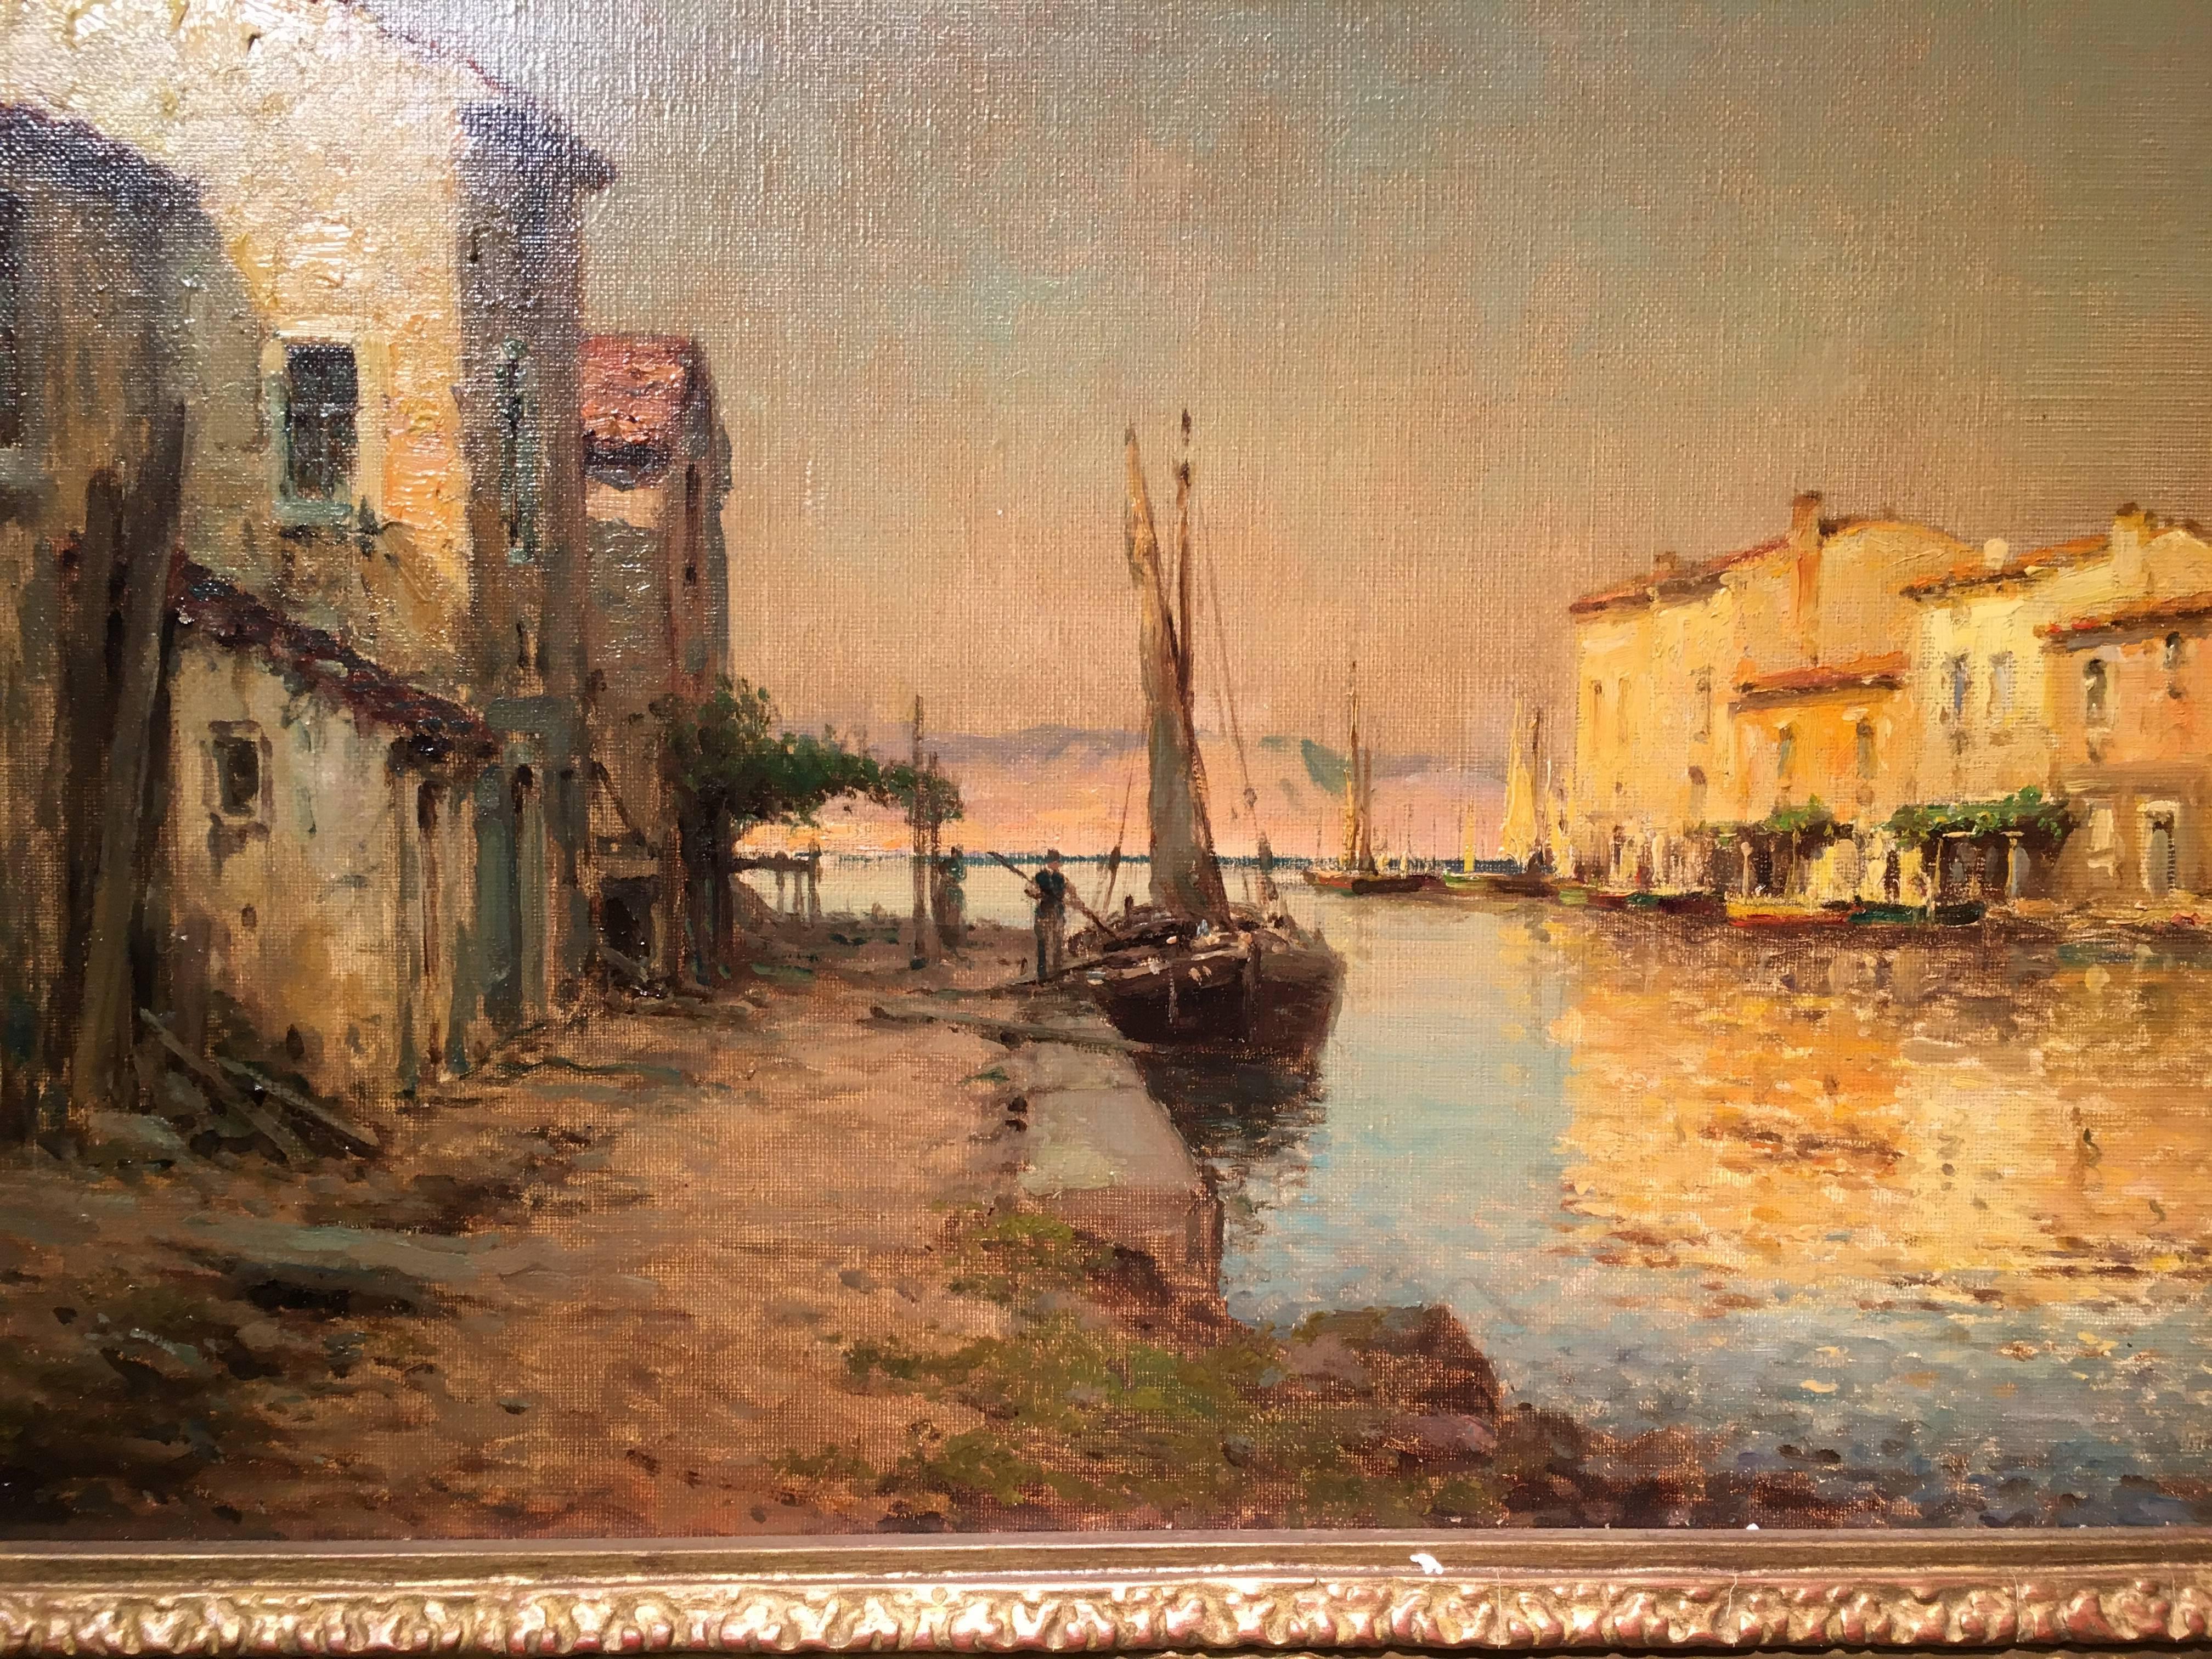 Summer Light along a canal, Venice, Italy - Impressionist Painting by Antoine Bouvard (Marc Aldine)